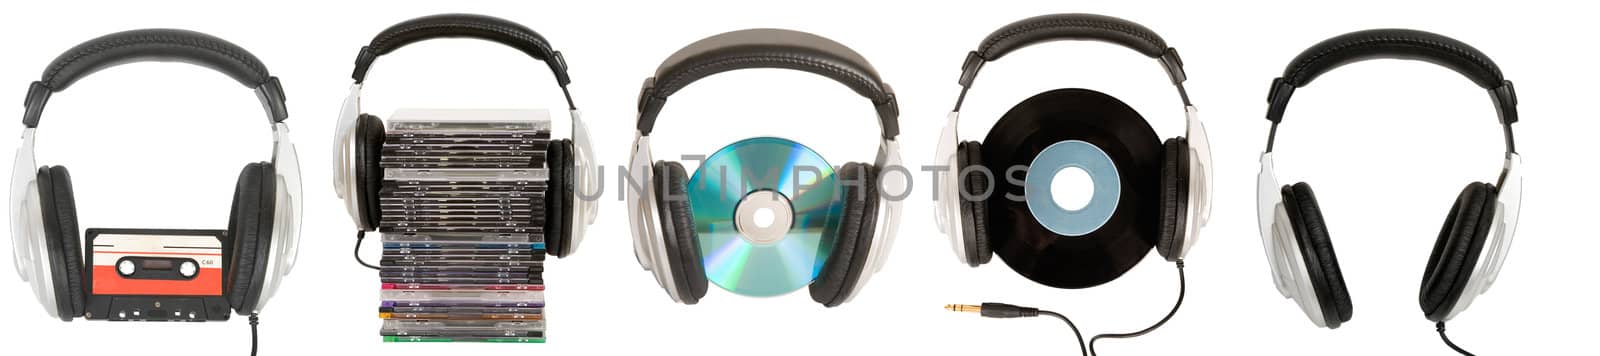 front view of dj headphones with different musical object